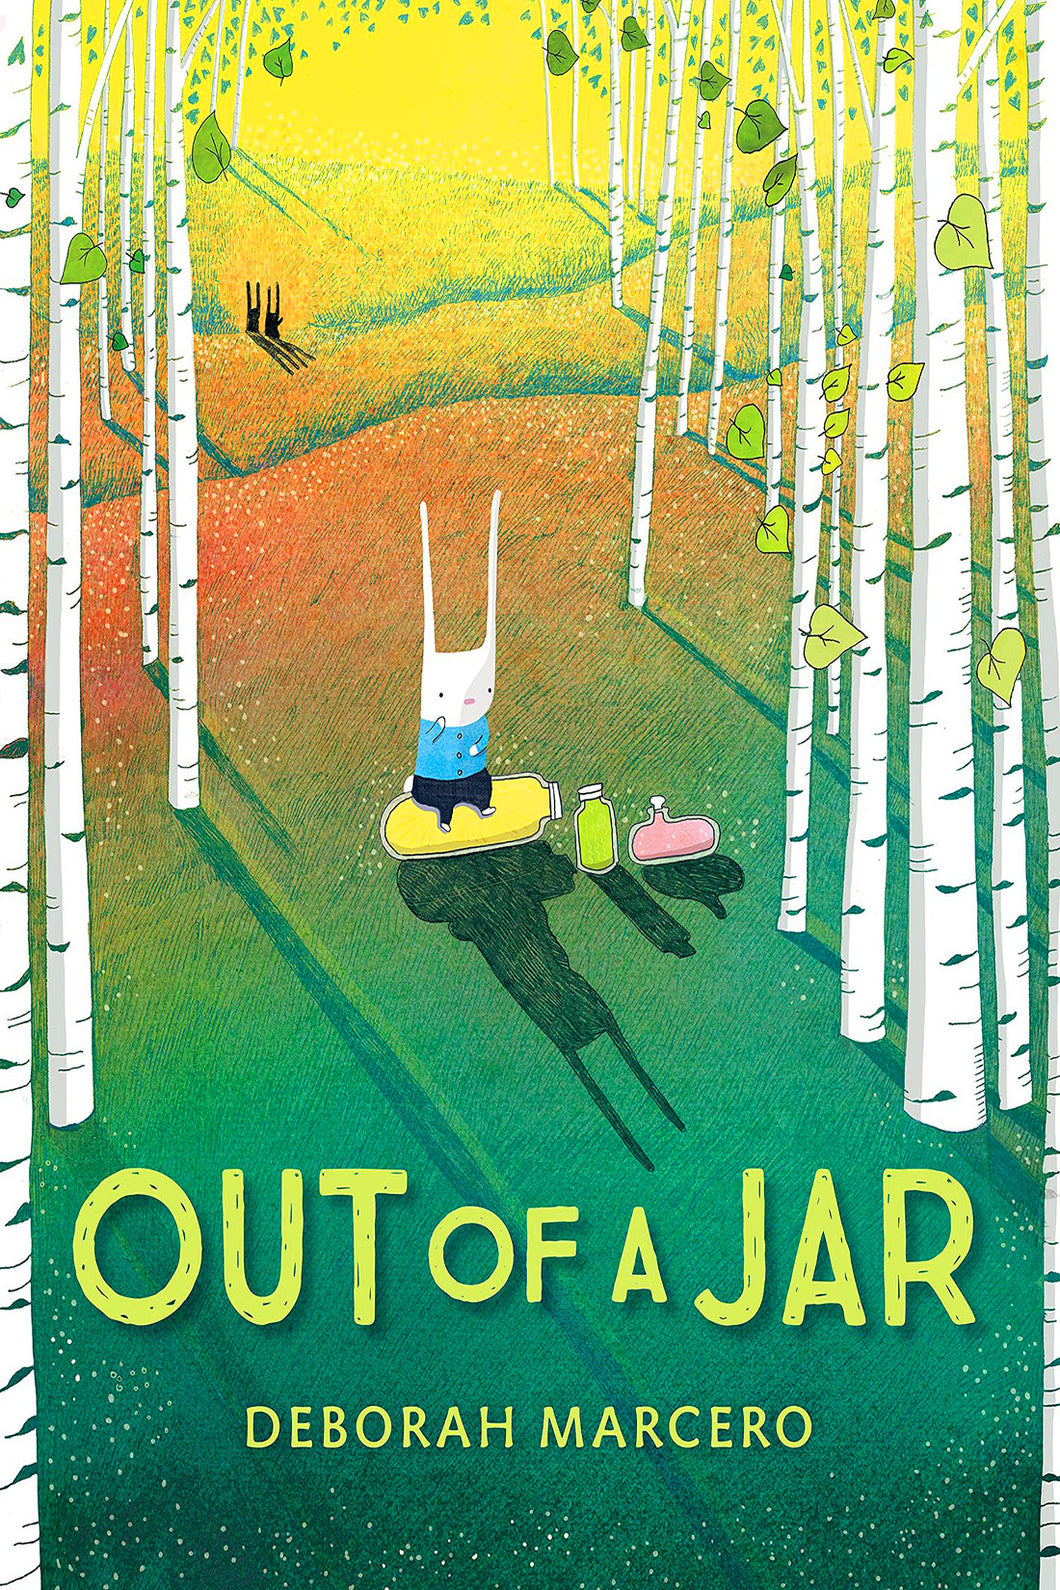 Out of a Jar by Deborah Marcero / Hardcover - NEW BOOK